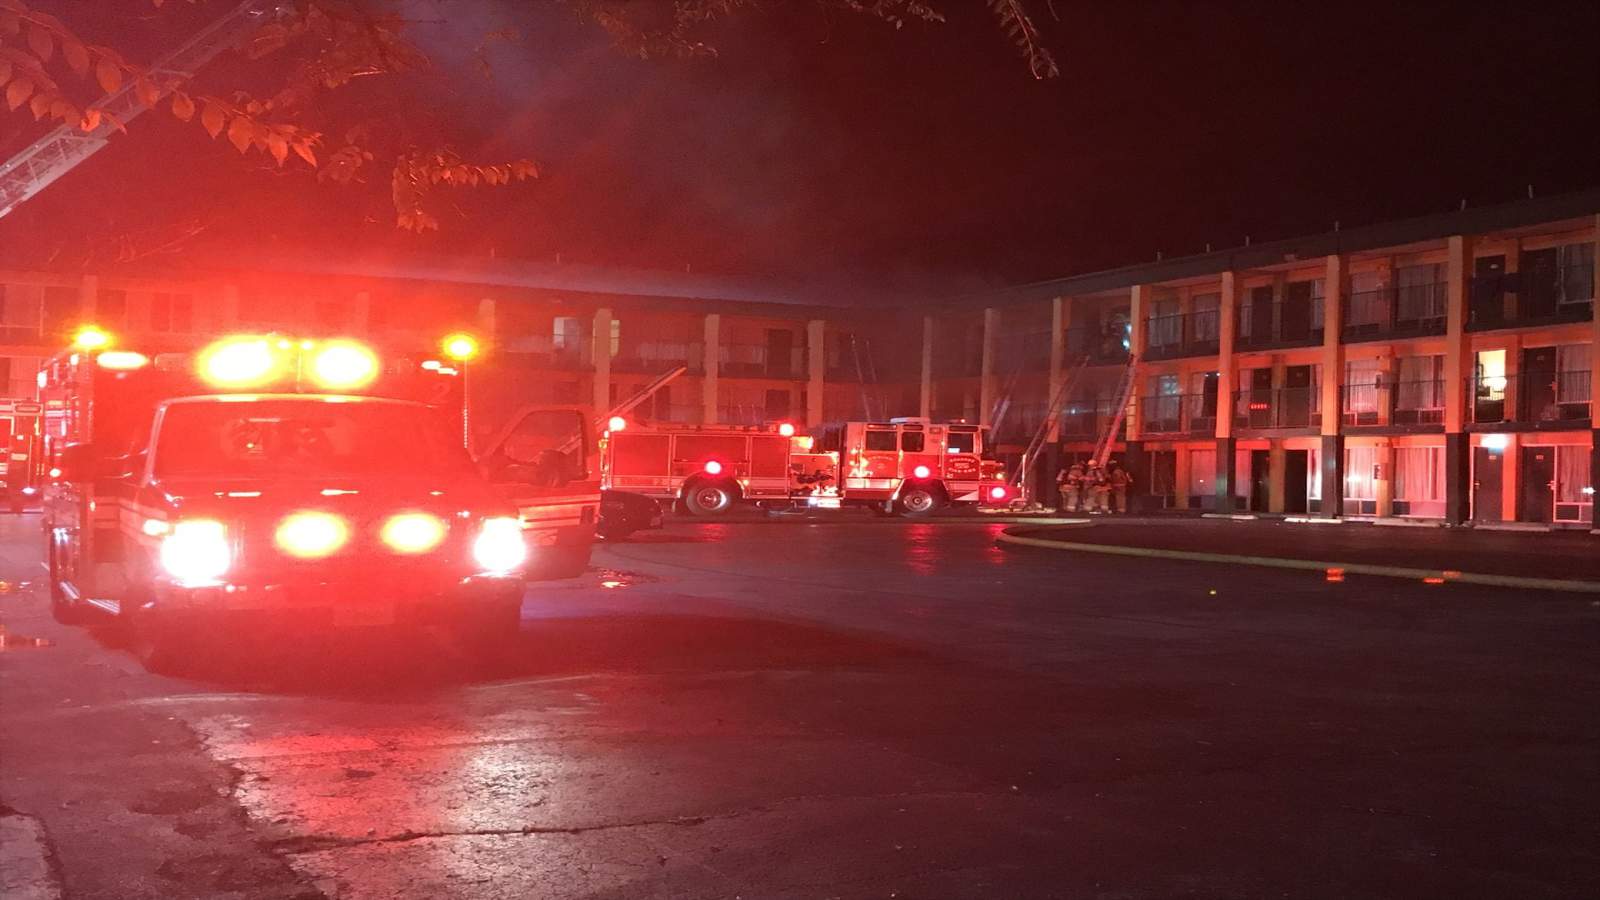 Roanoke Days Inn fire now being investigated as arson